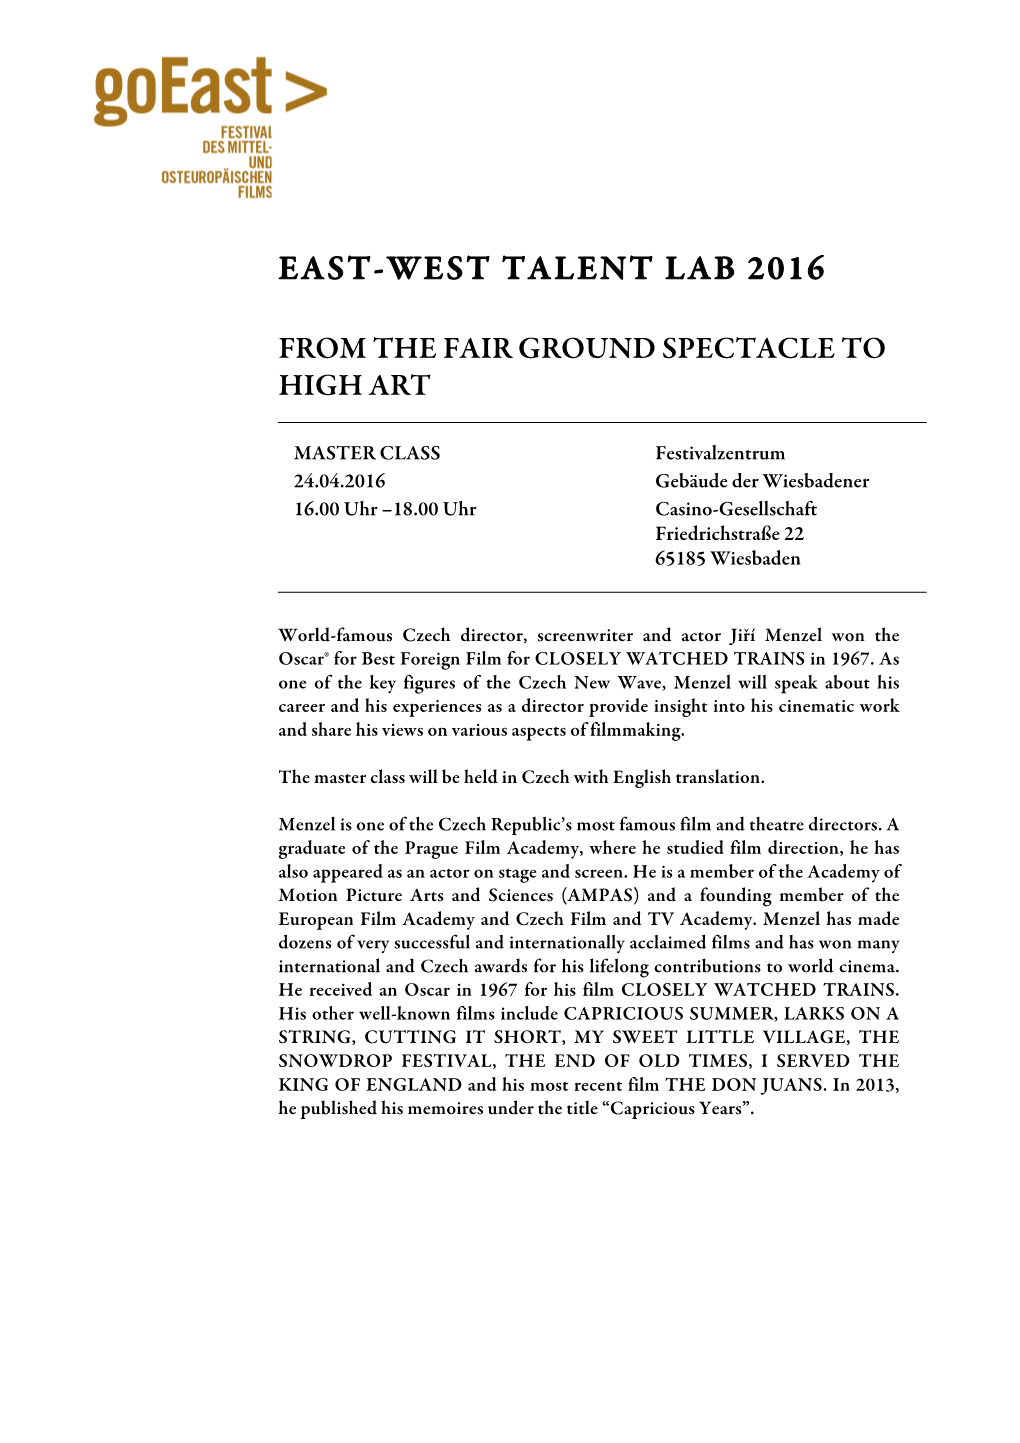 East-West Talent Lab 2016